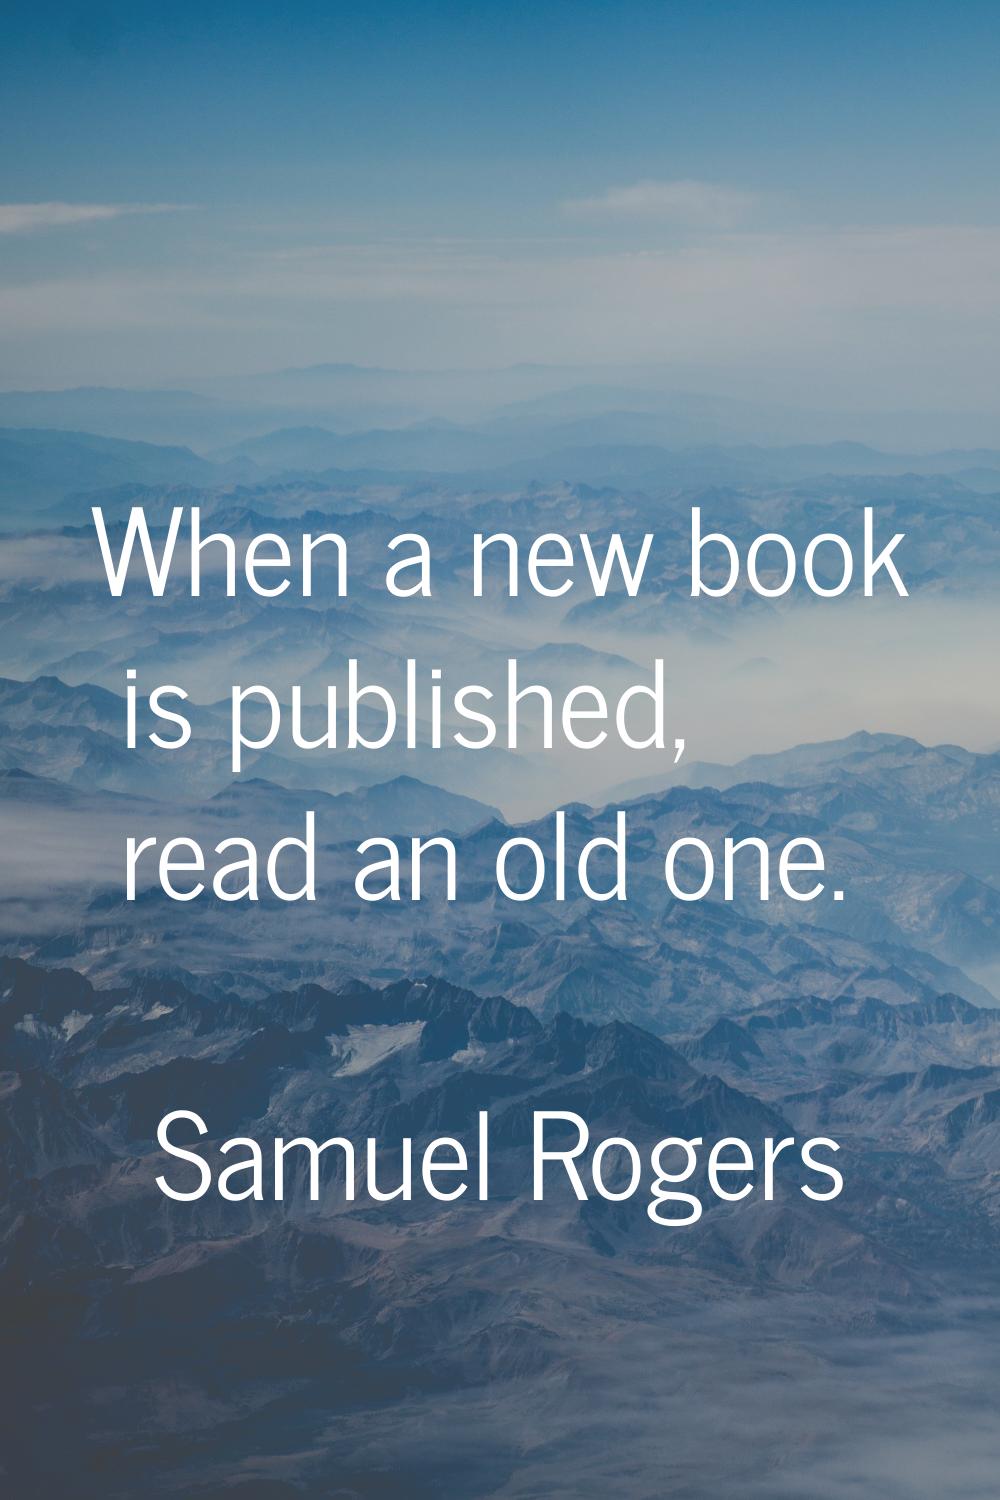 When a new book is published, read an old one.